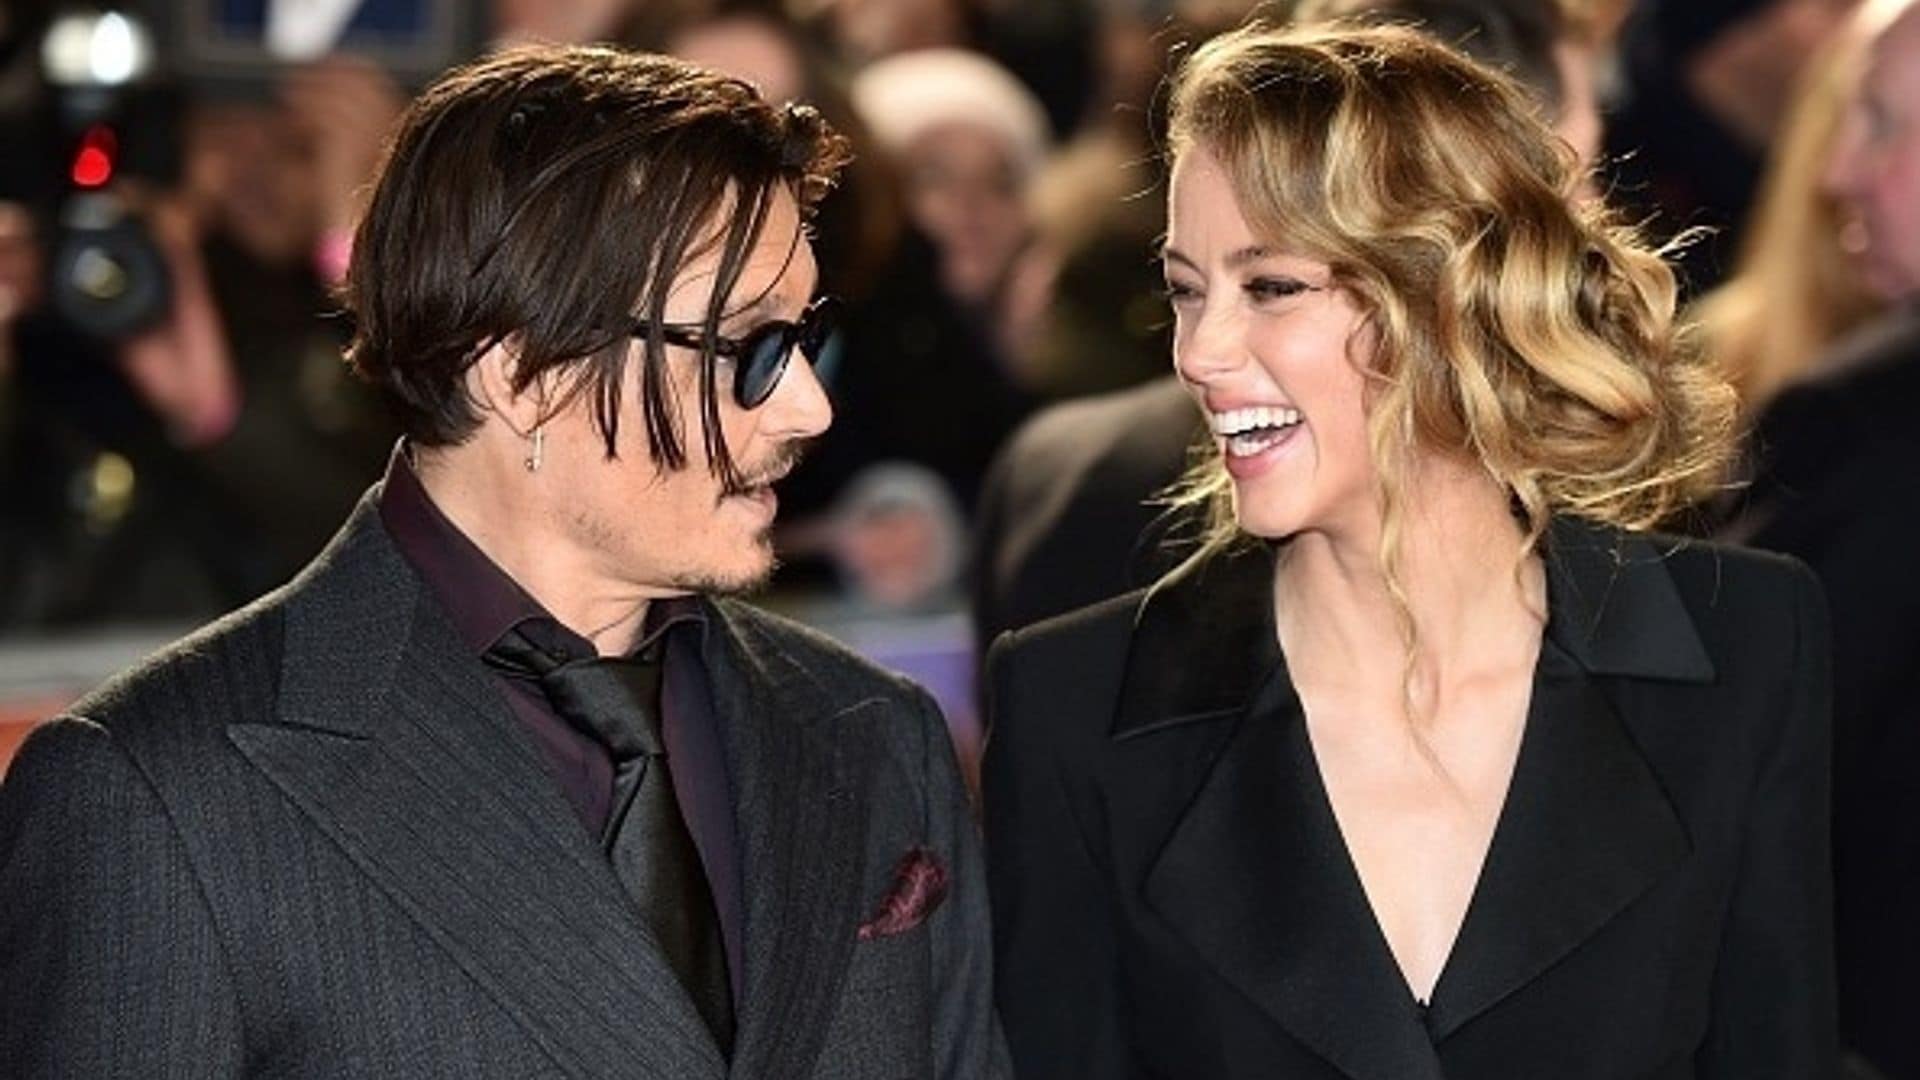 Johnny Depp and Amber Heard married in Los Angeles, say reports